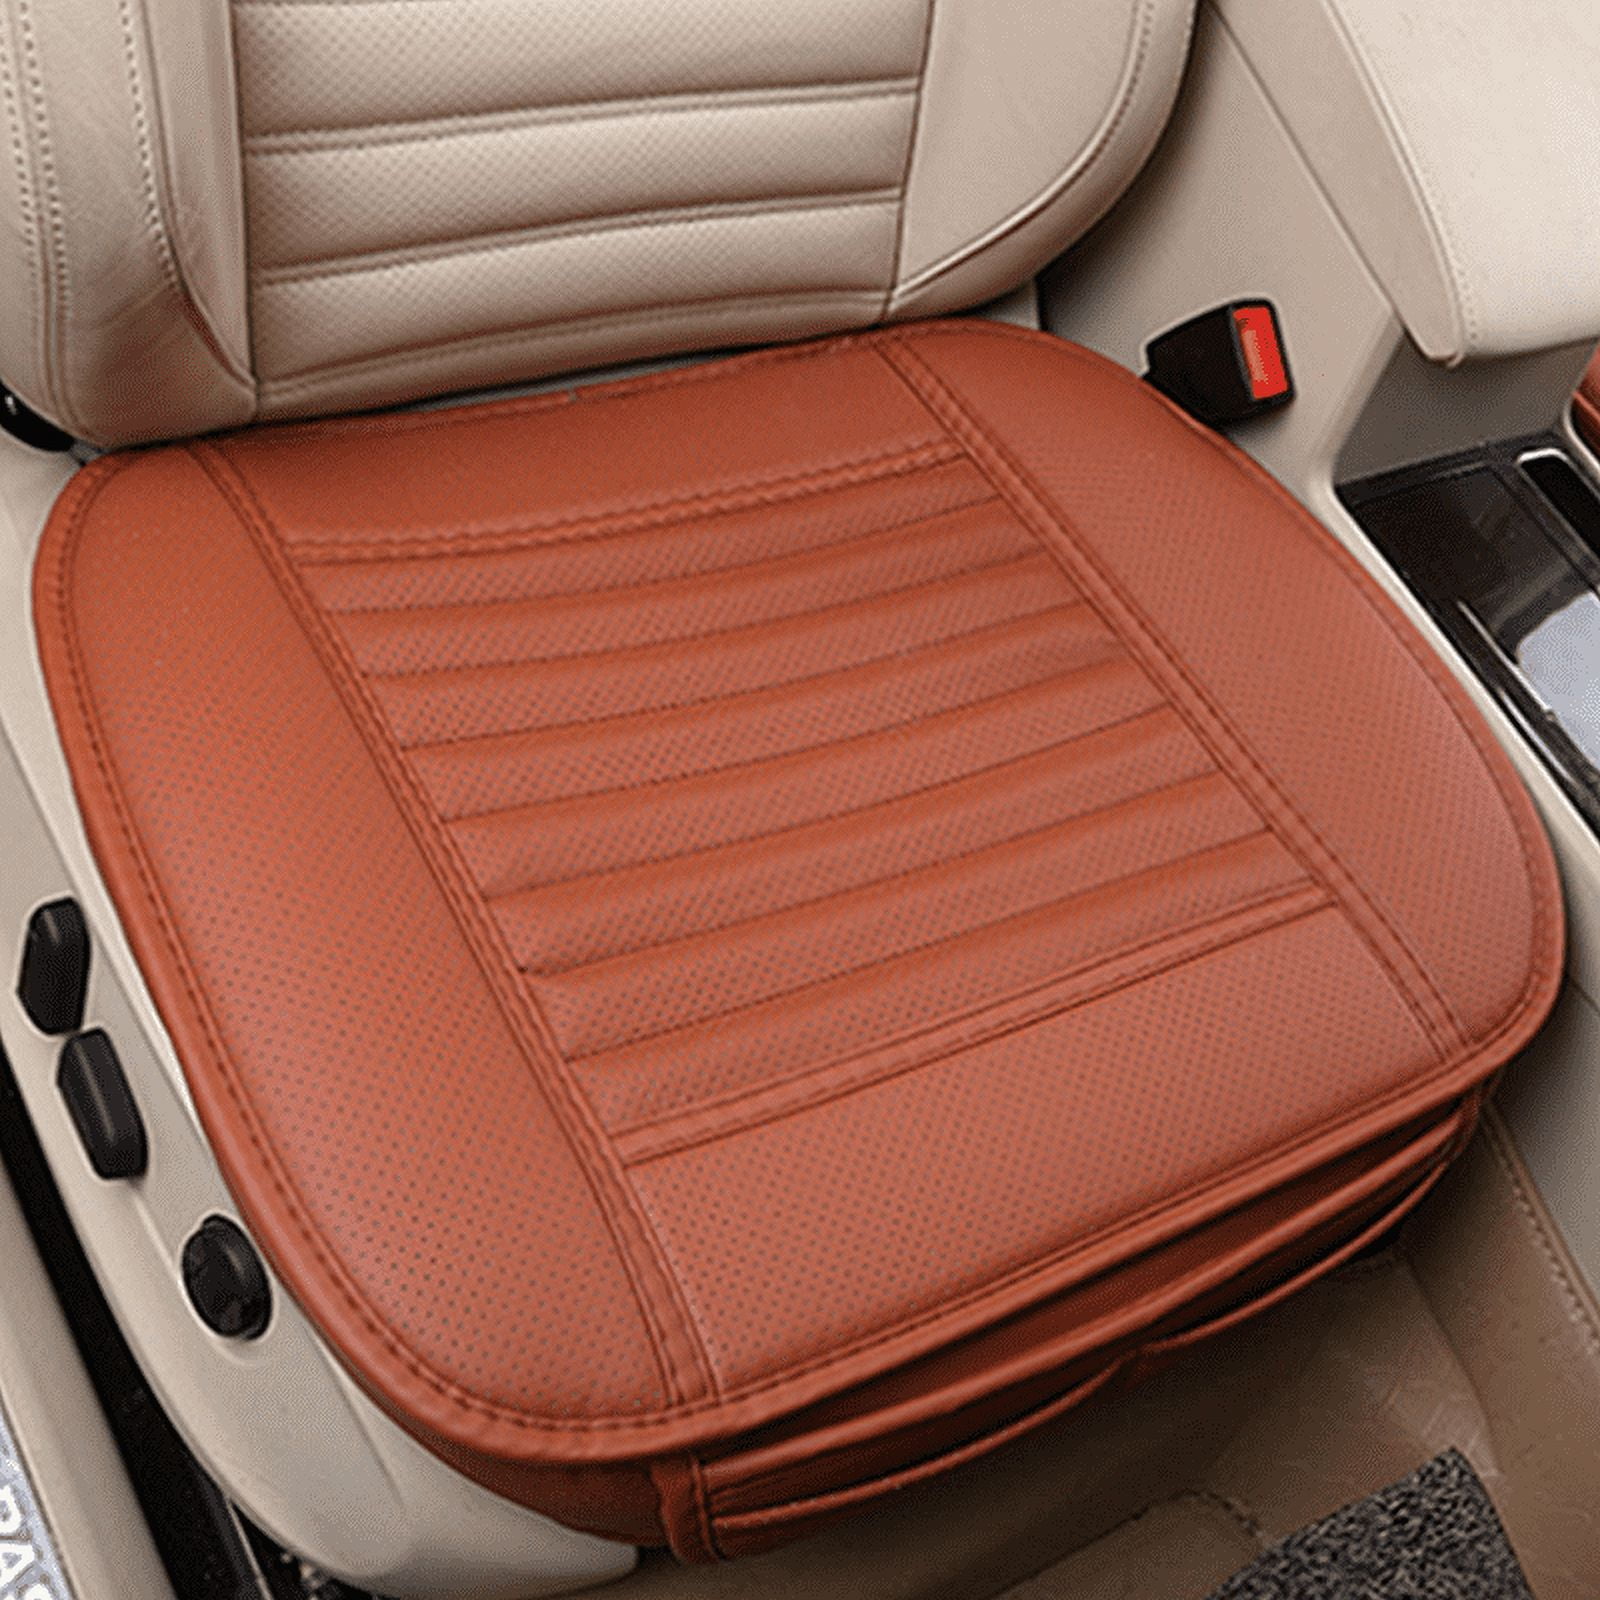 Edge Wrapping Car Front Seat Cushion Cover-Black/Grey/Beige – Online store  for your car